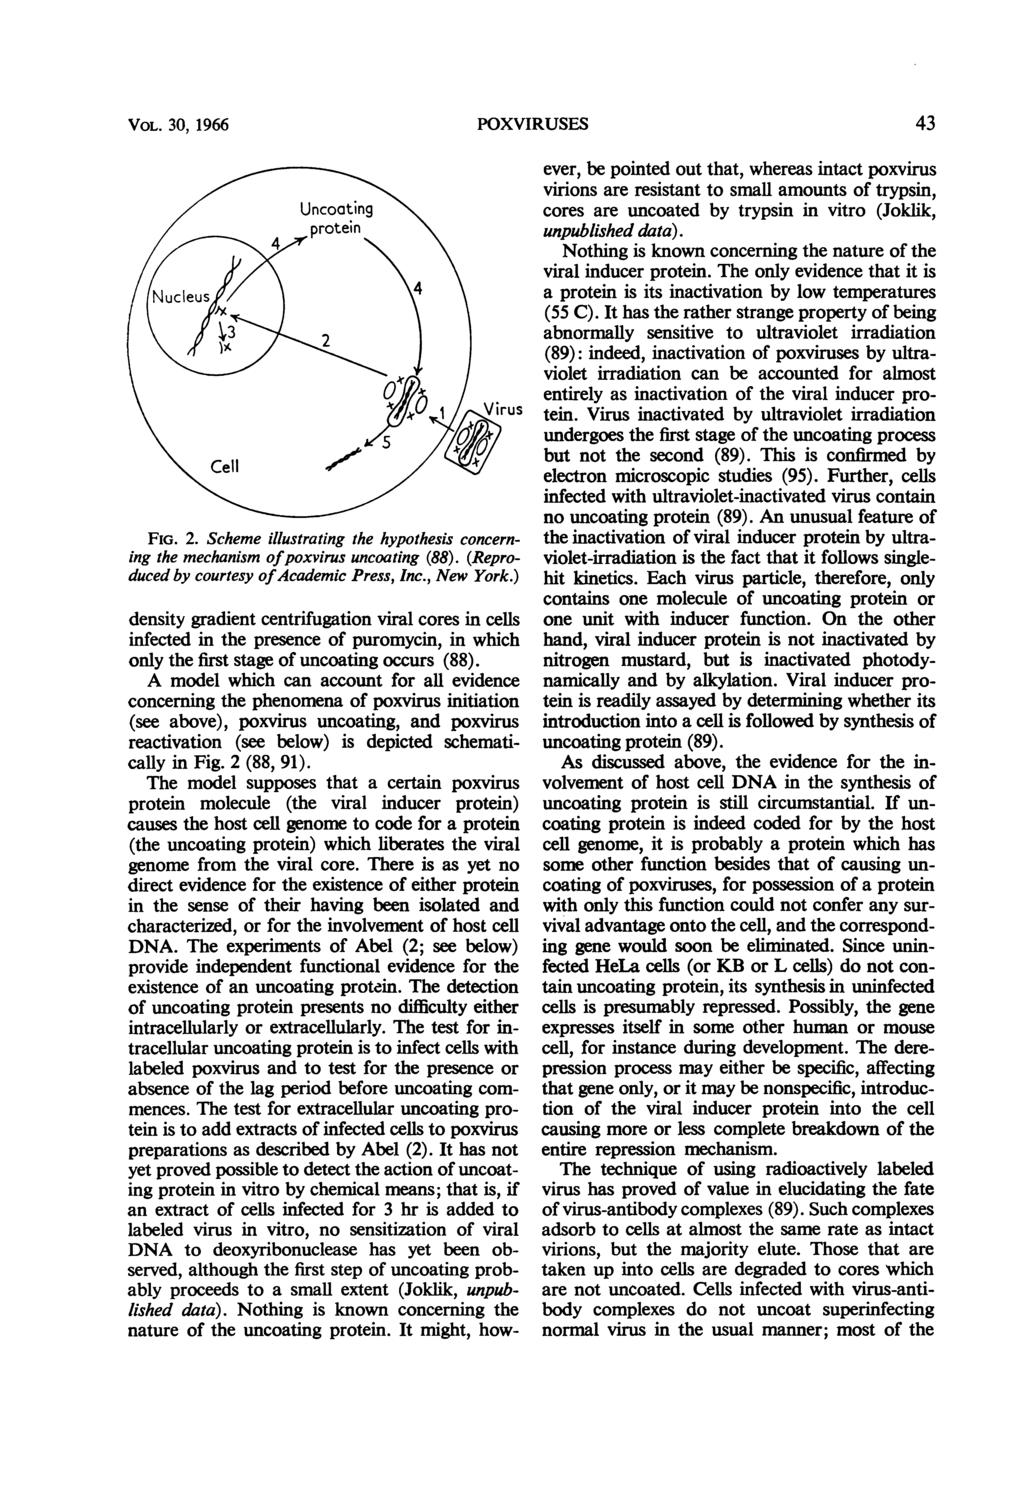 VOL. 30, 1966 POXVIRUSES 43 FIG. 2. Scheme illustrating the hypothesis concerning the mechanism ofpoxvirus uncoating (88). (Reproduced by courtesy ofacademic Press, Inc., New York.